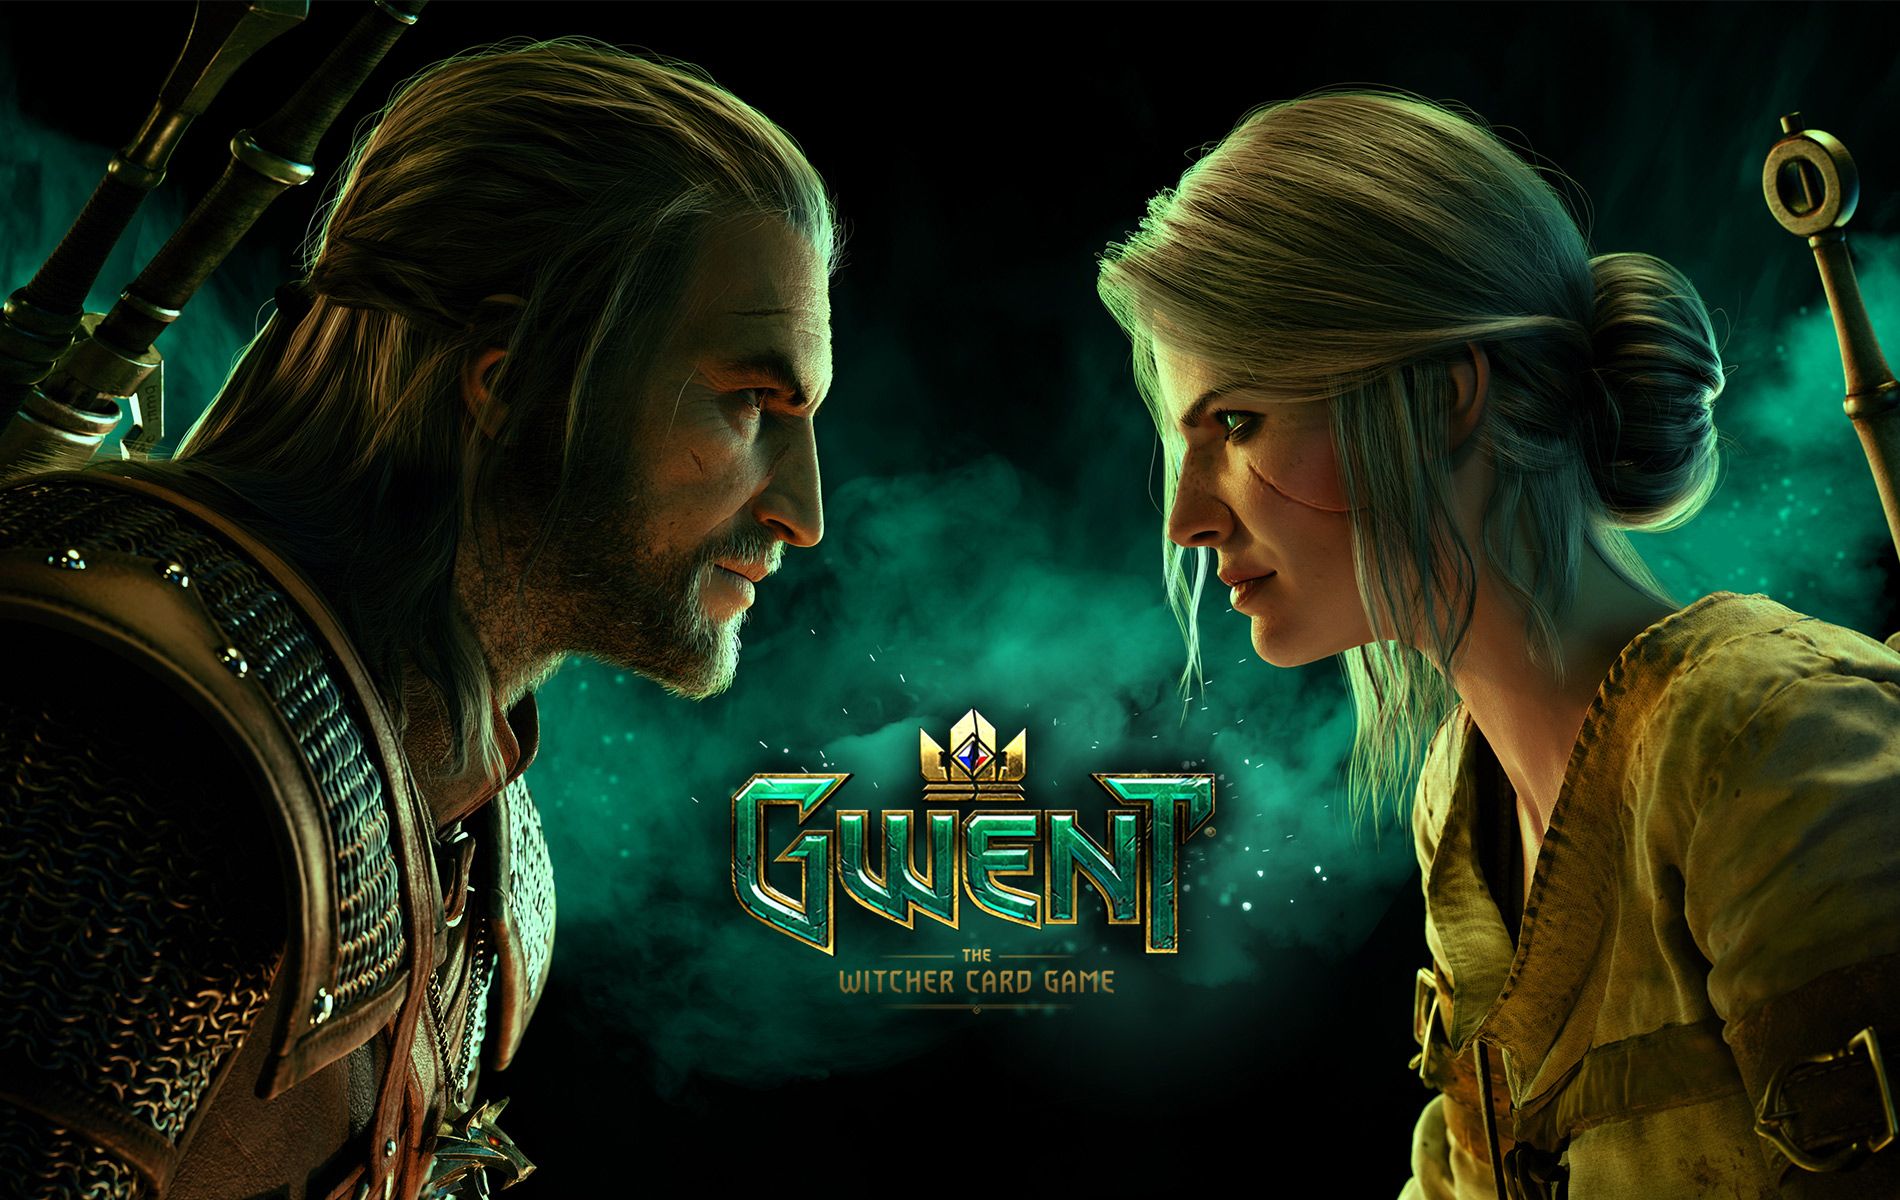 The Witcher Gwent